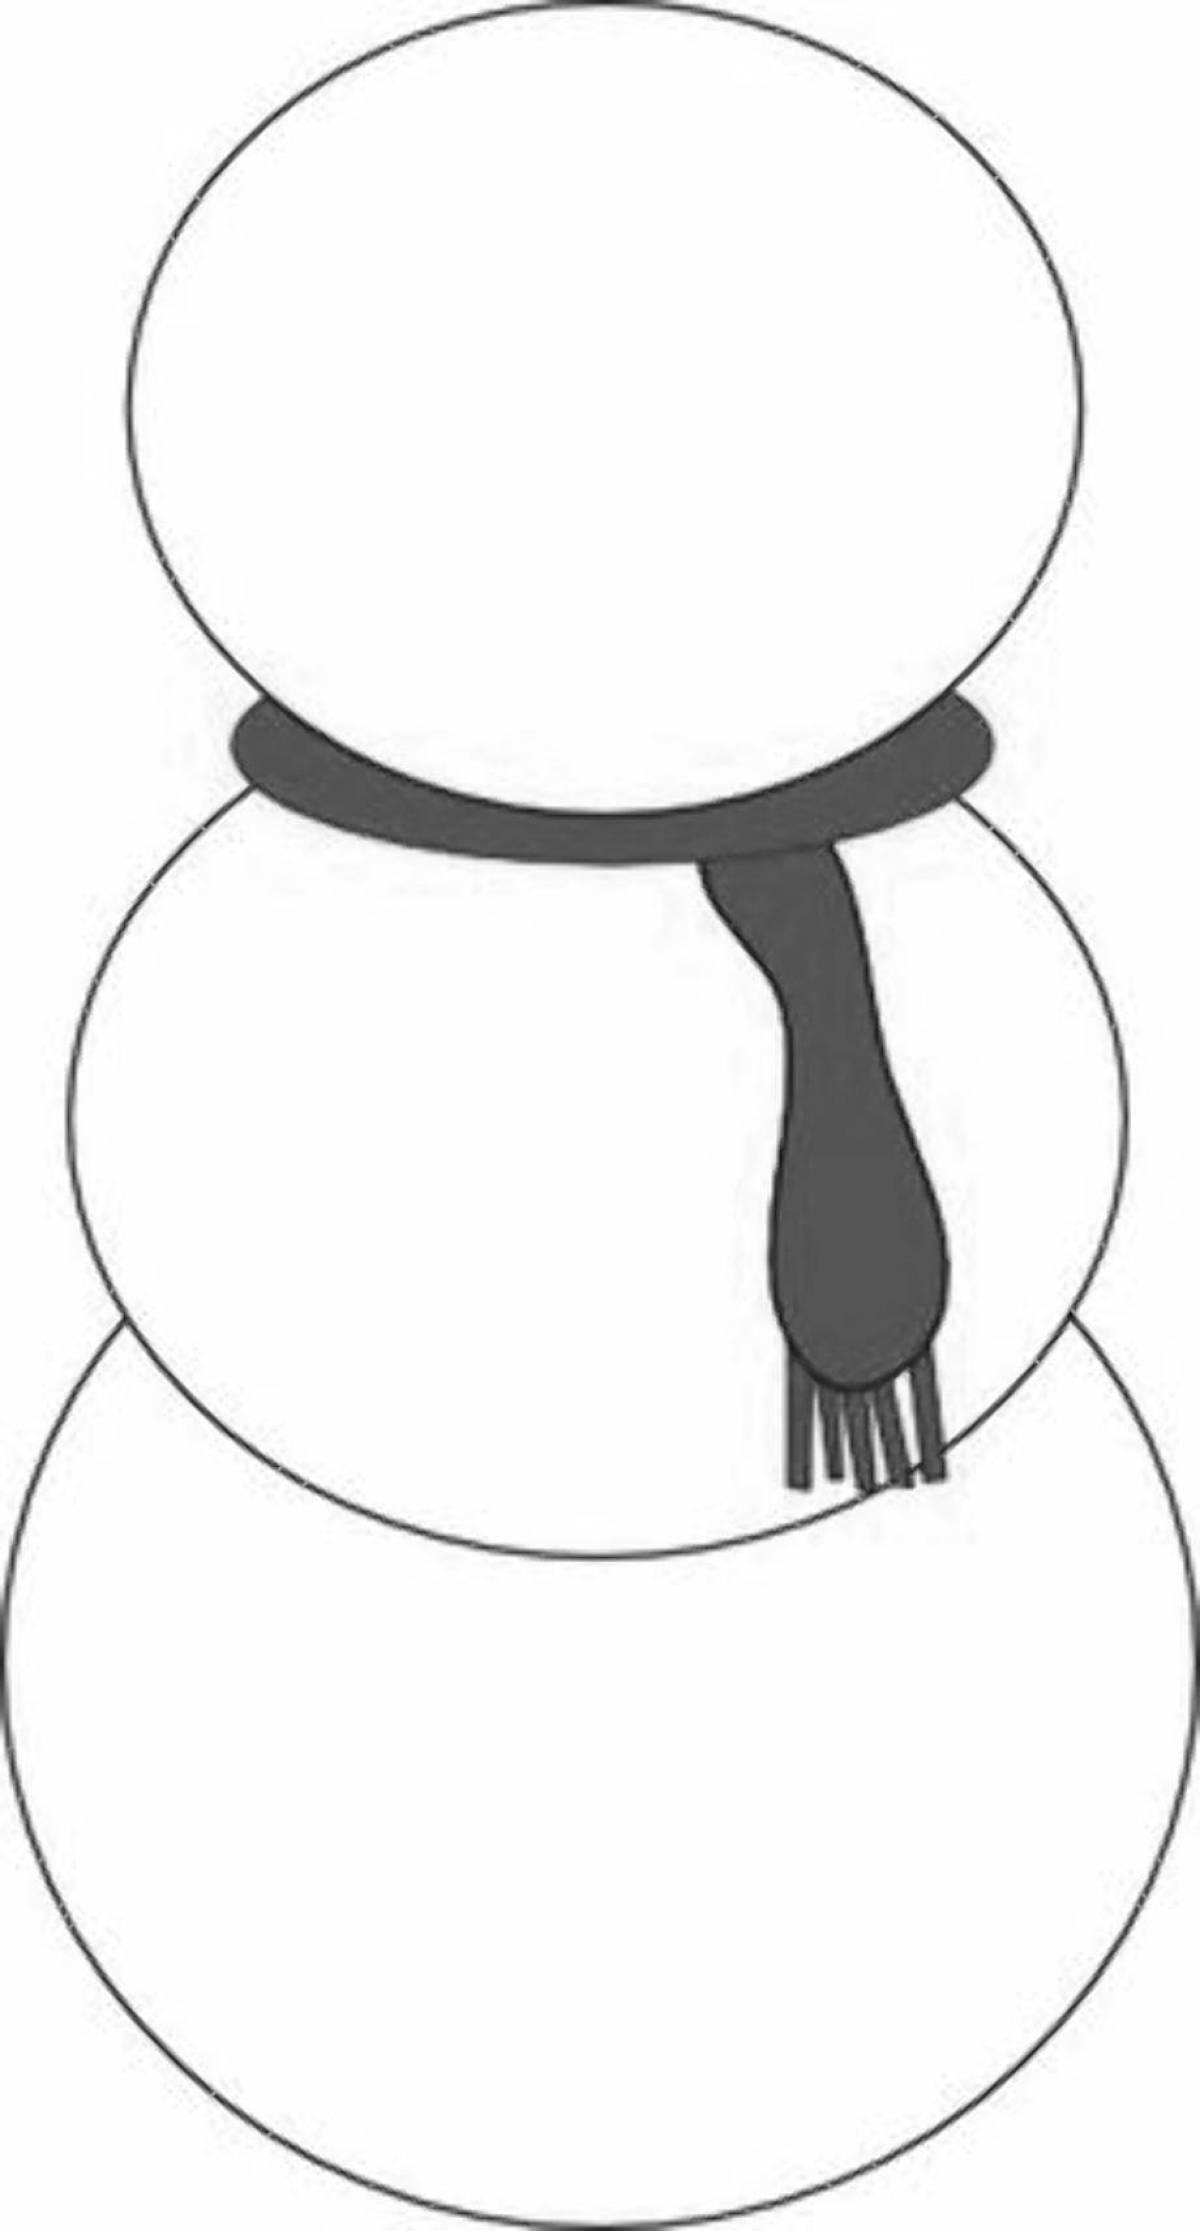 Amazing coloring book snowman without a nose